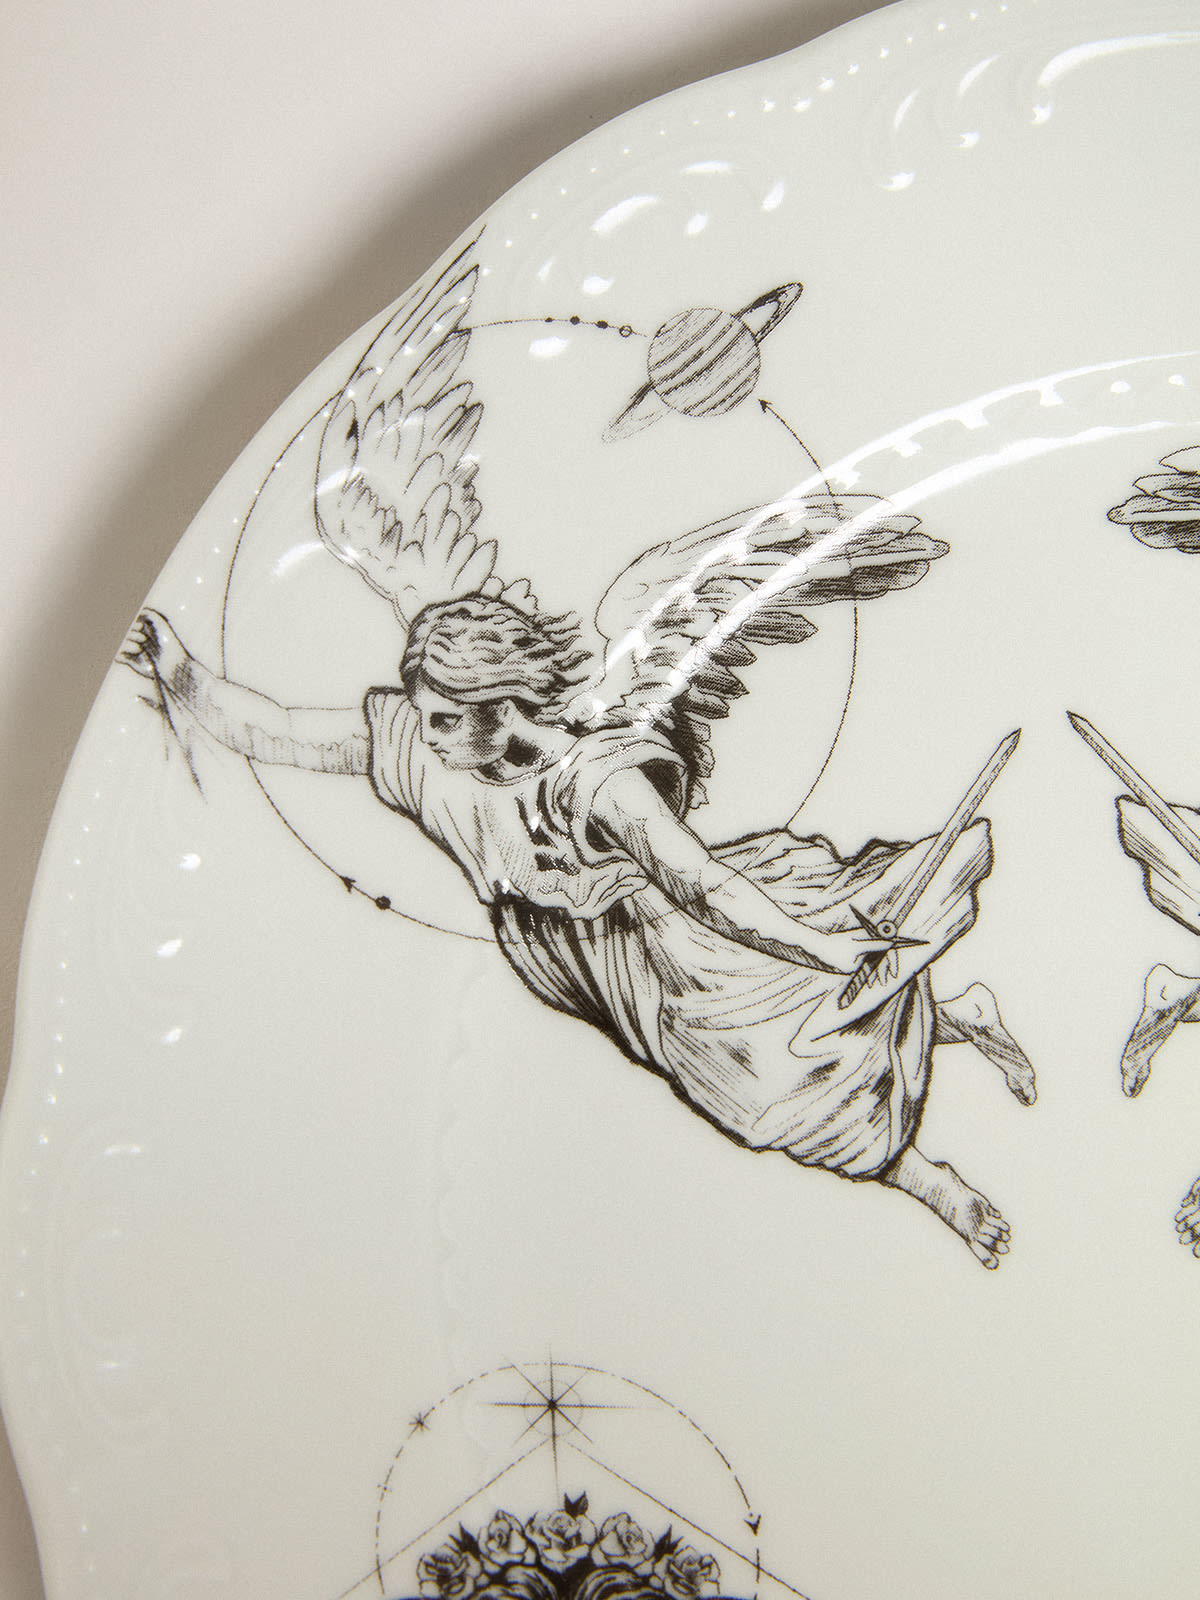 Golden Goose - Exclusive HAUS of Dreamers porcelain plate in 